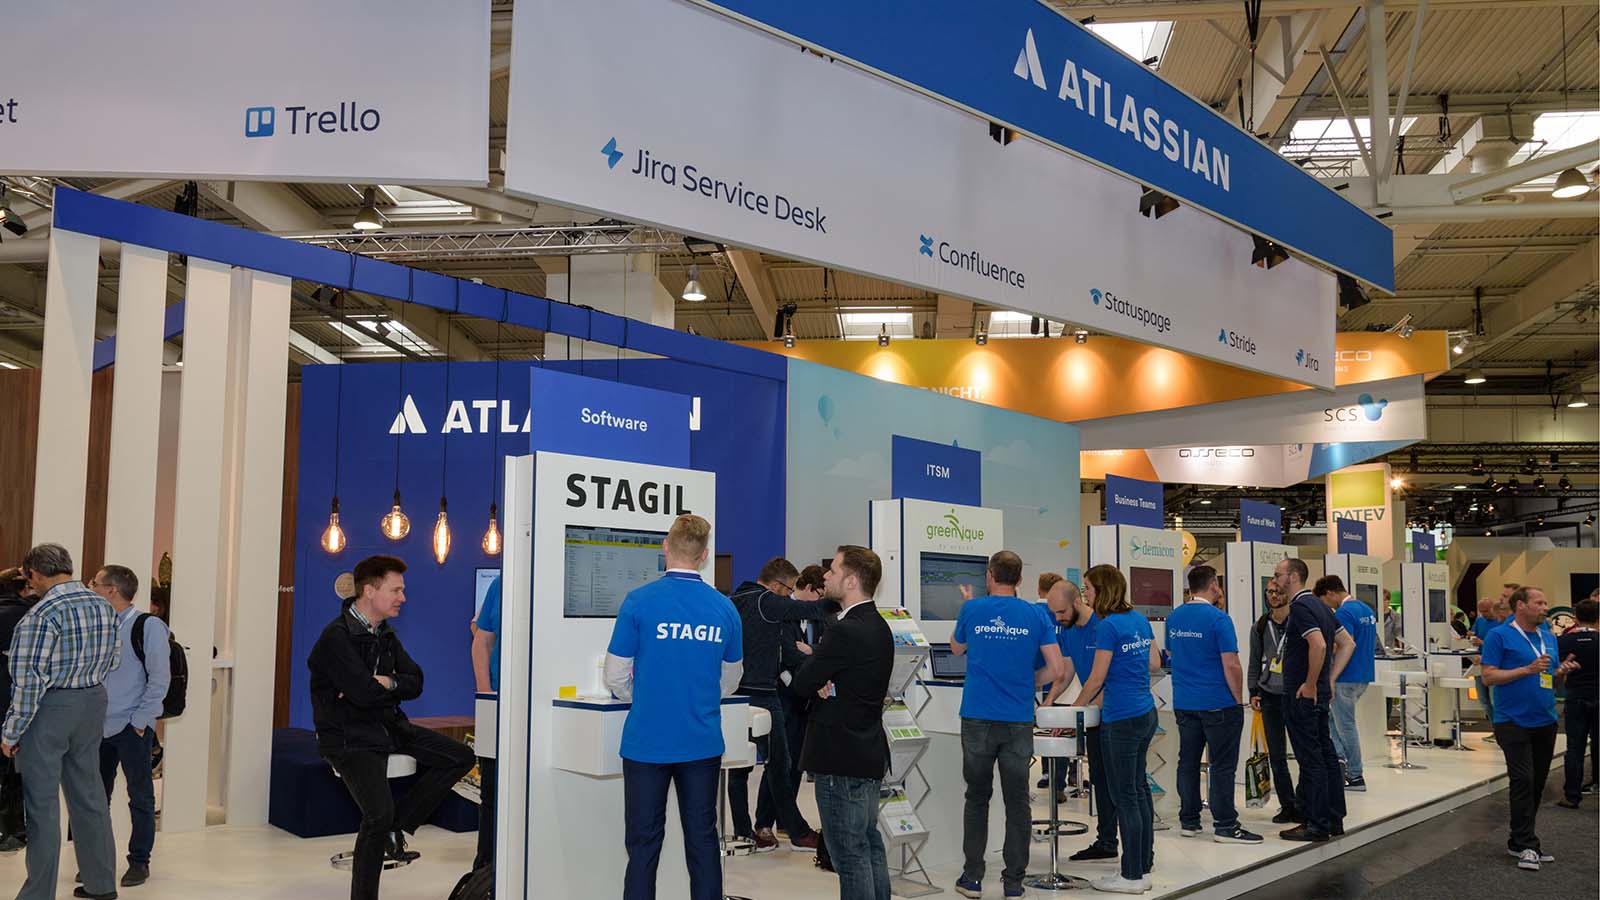 Atlassian (TEAM) employees stand at a booth in Hanover, Germany.